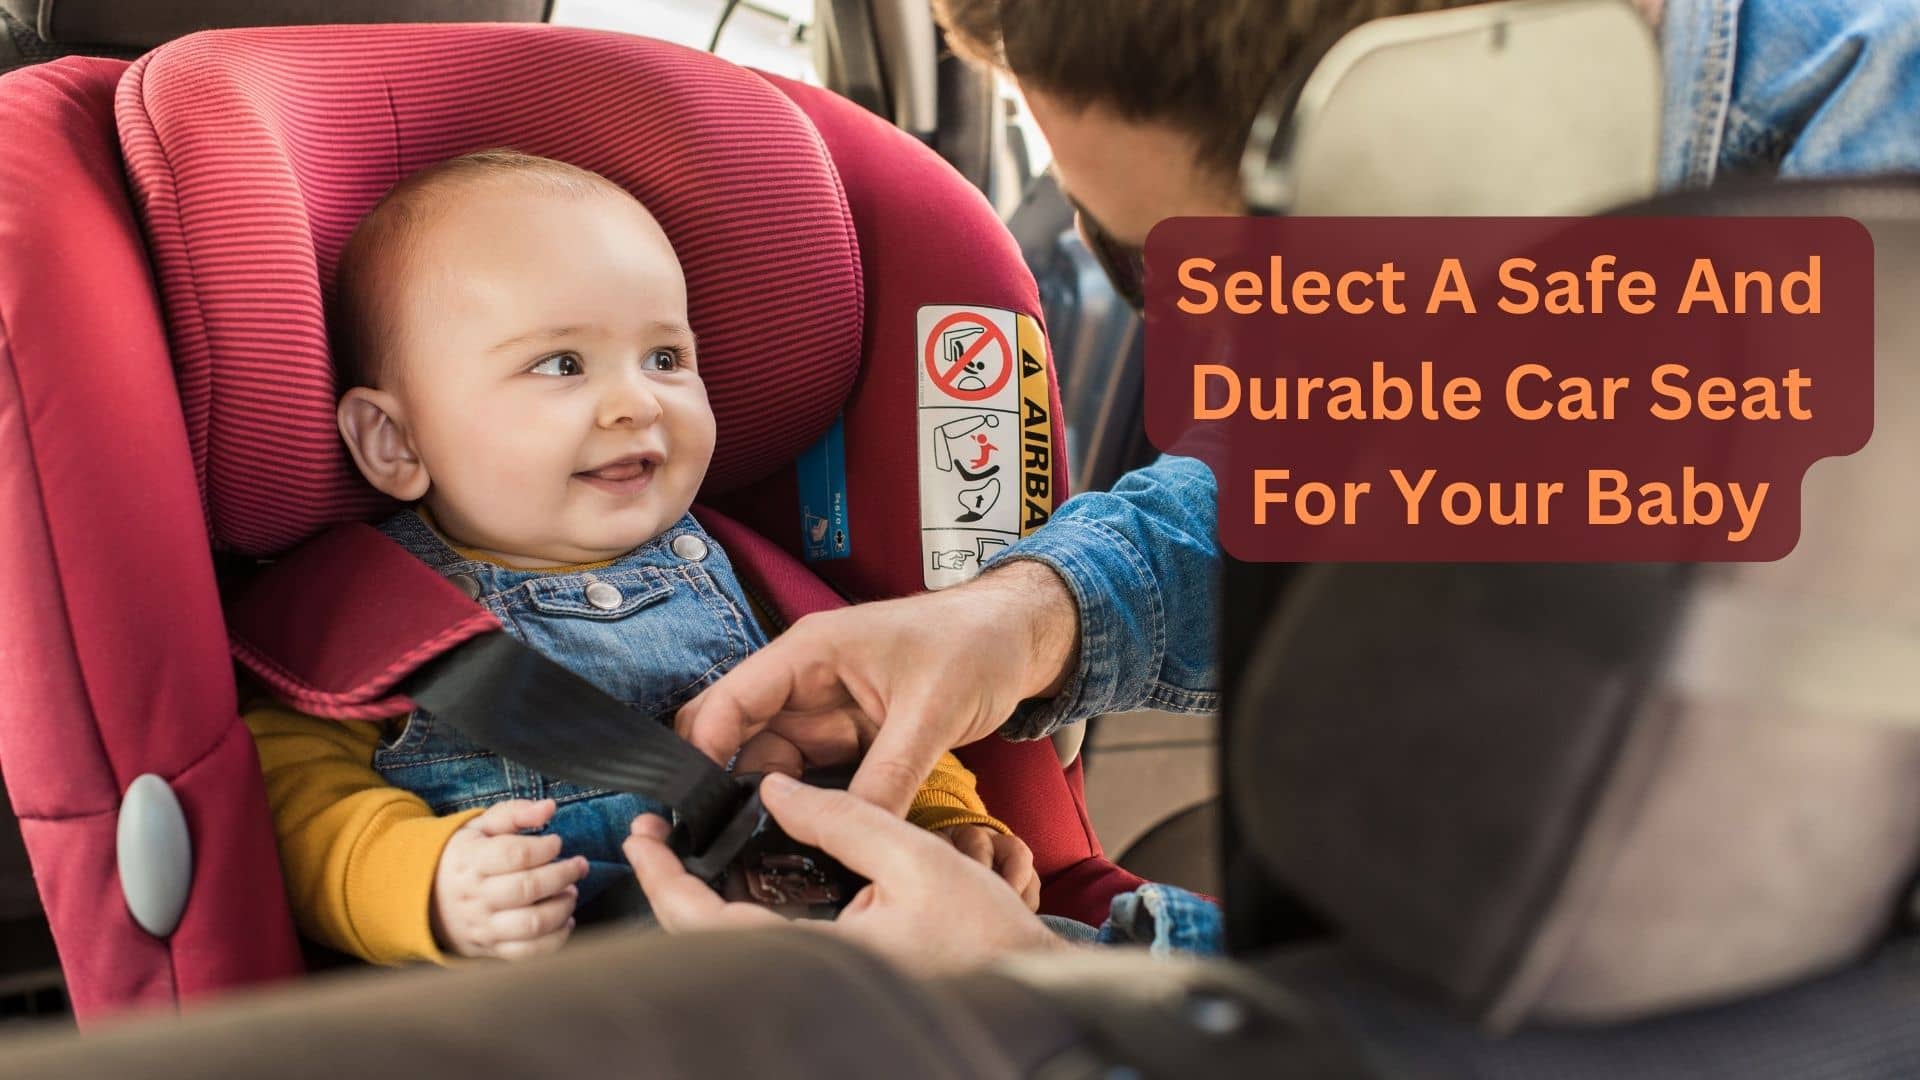 What Is The Best Infant Car Seat?